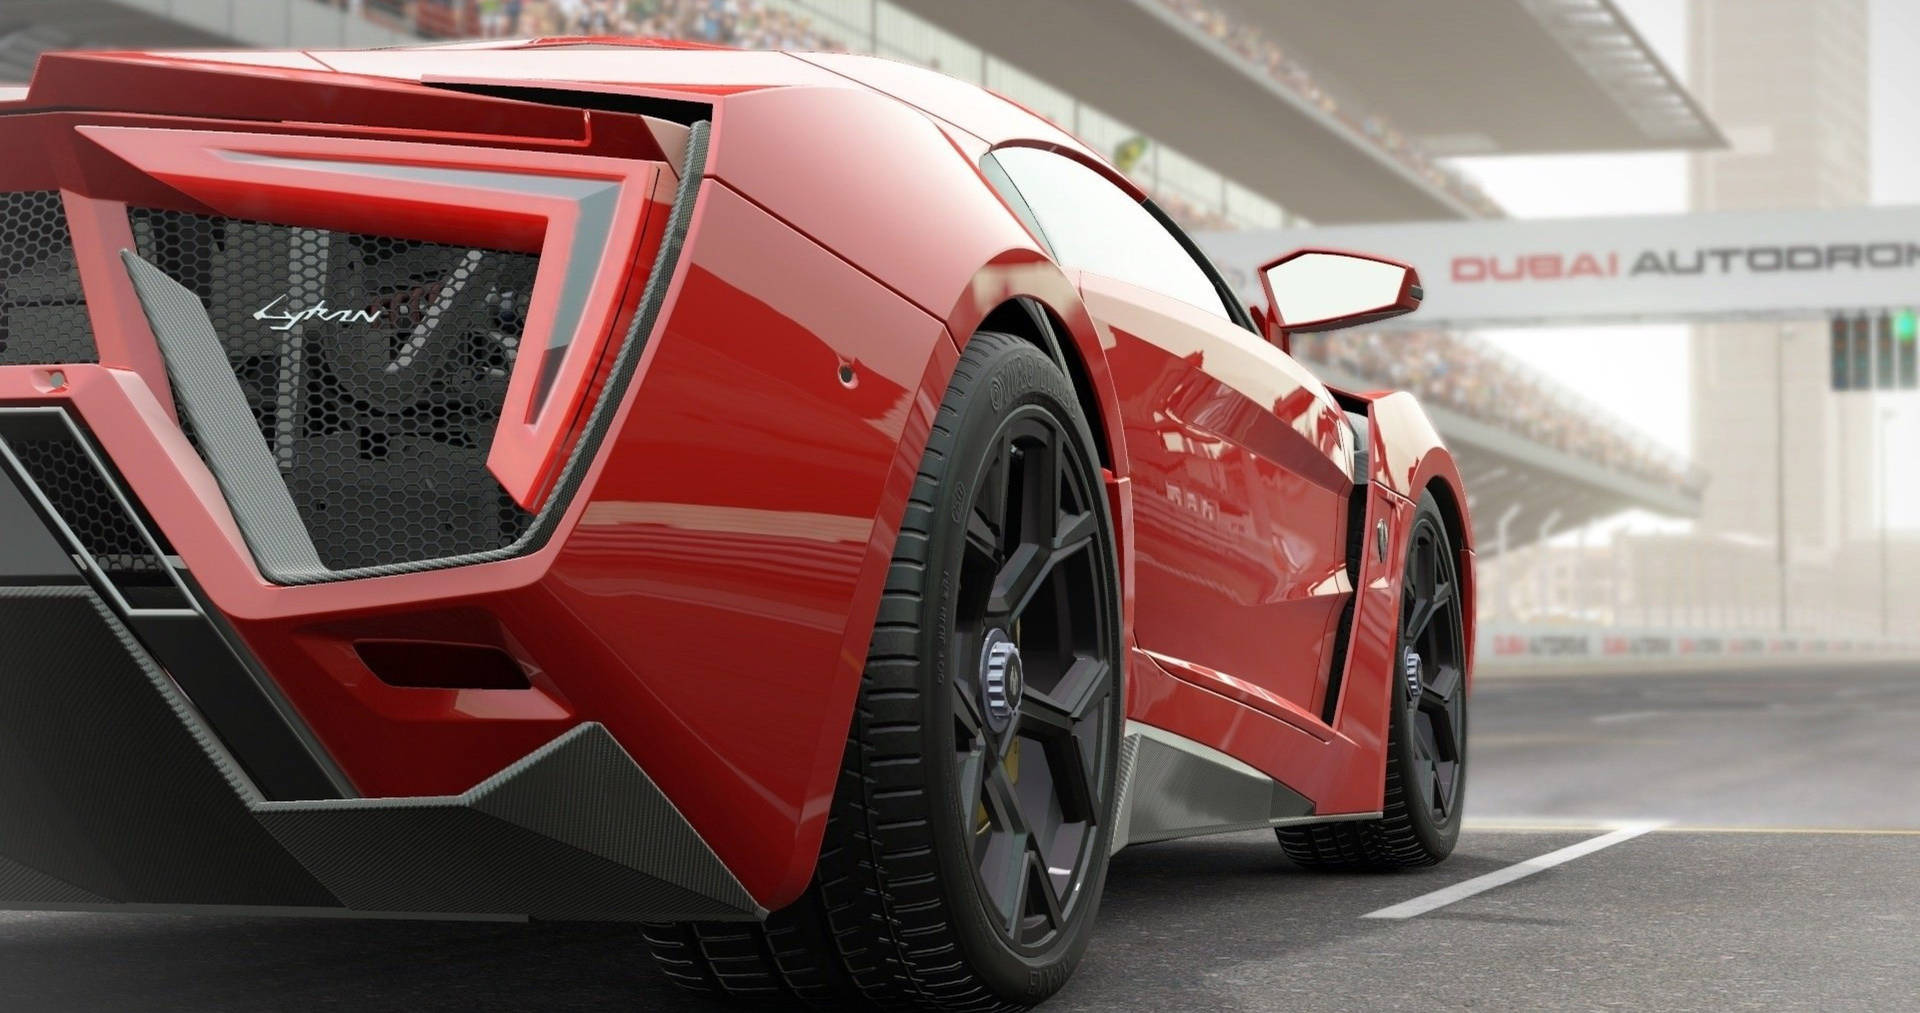 Caption: Astonishing Drive - Lycan Hypersport in Project Cars 4K Wallpaper